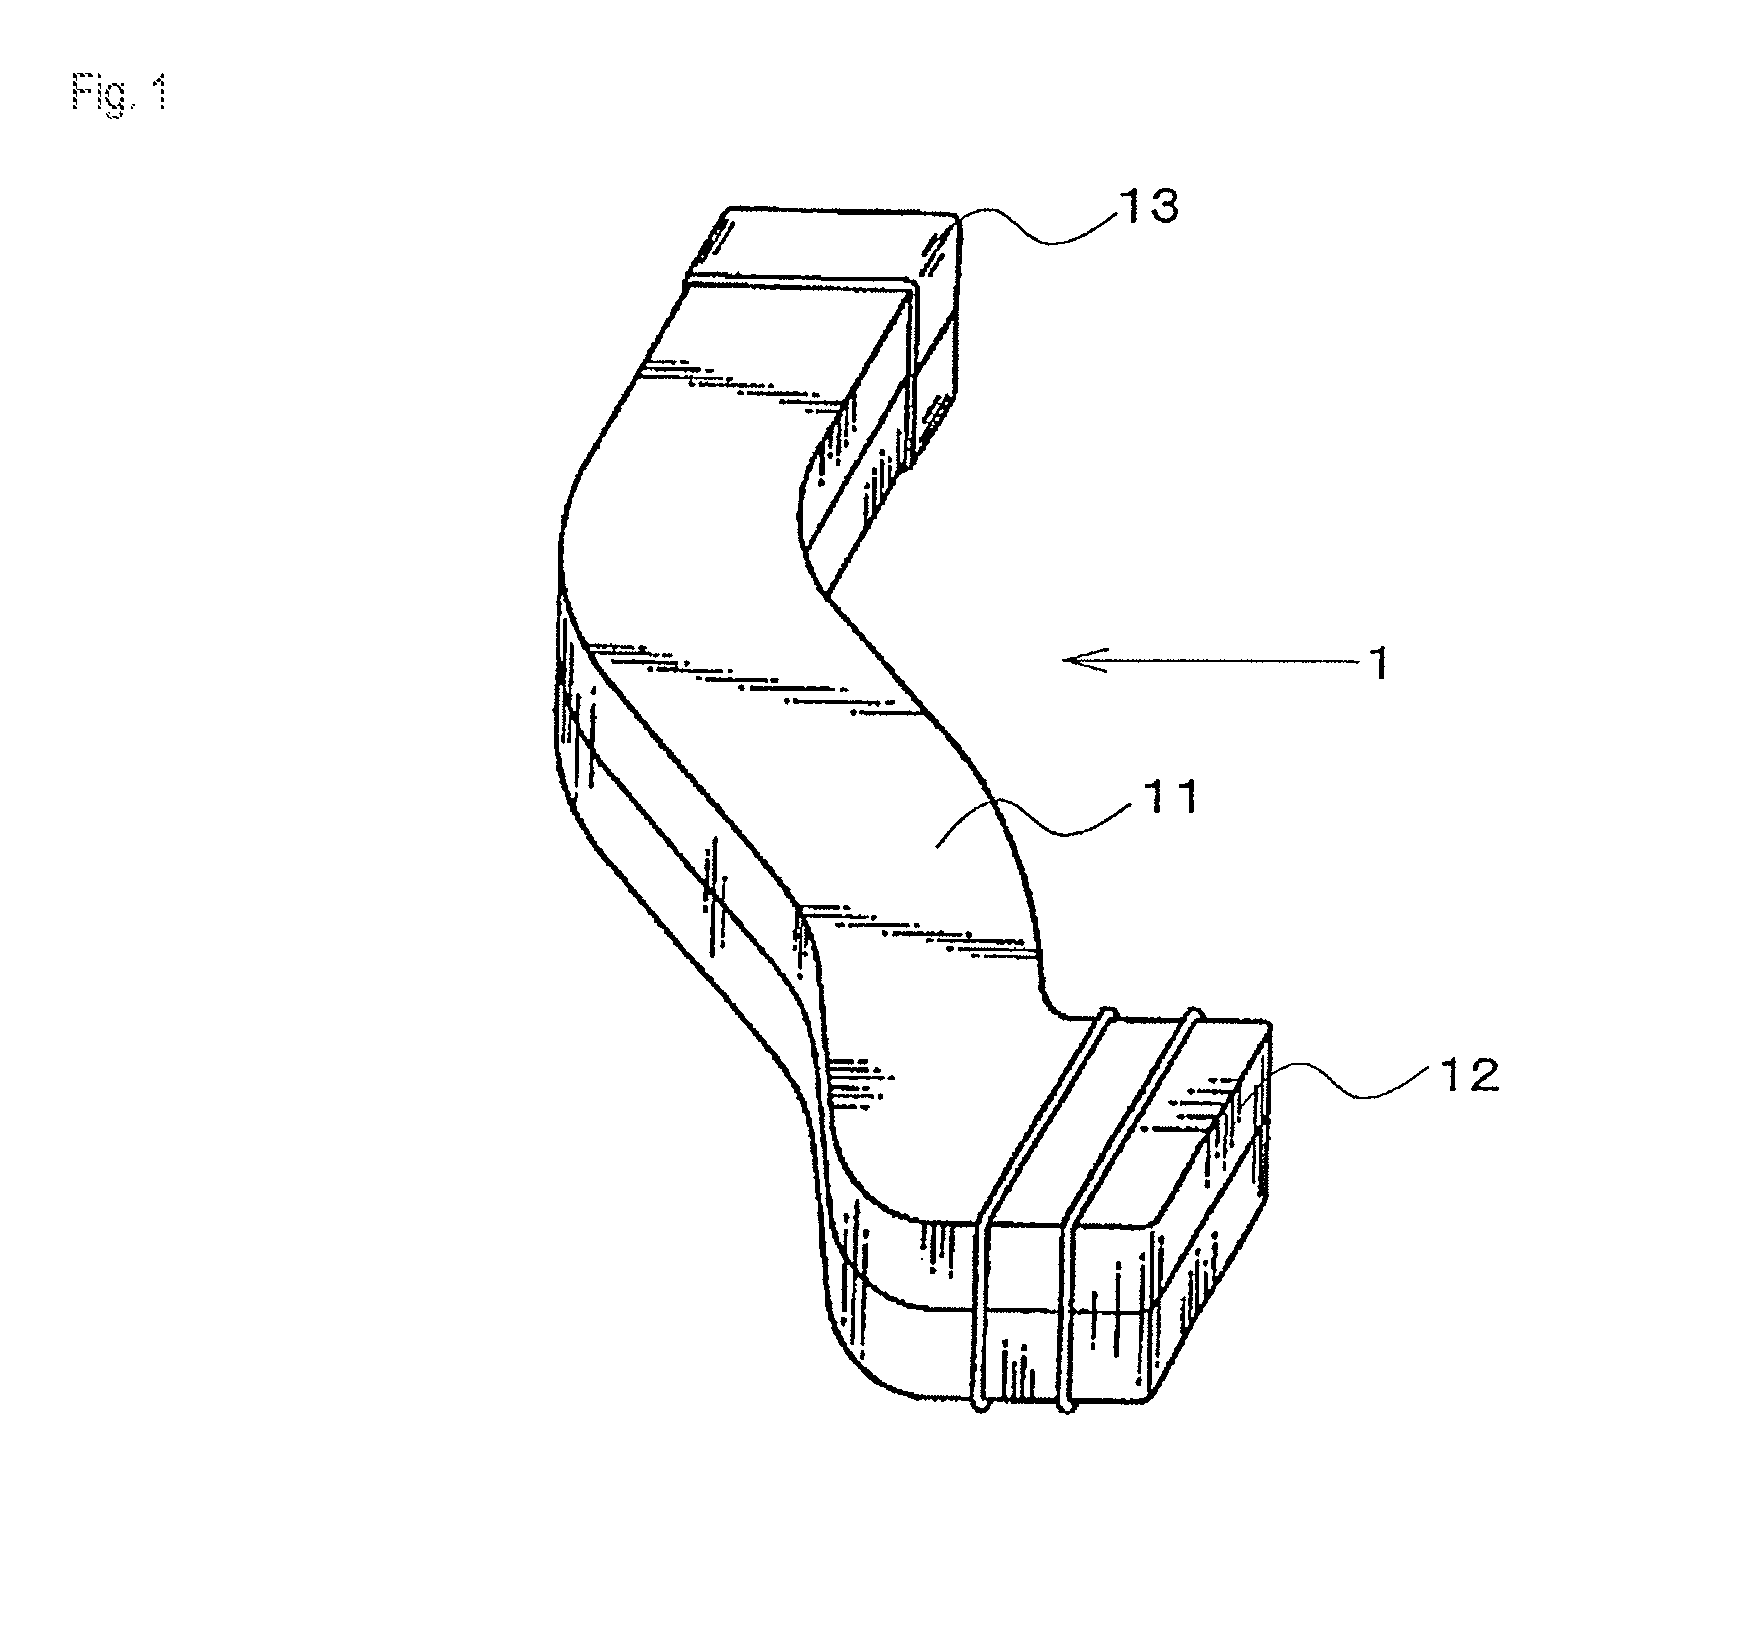 Blow-molded foam and process for producing the same